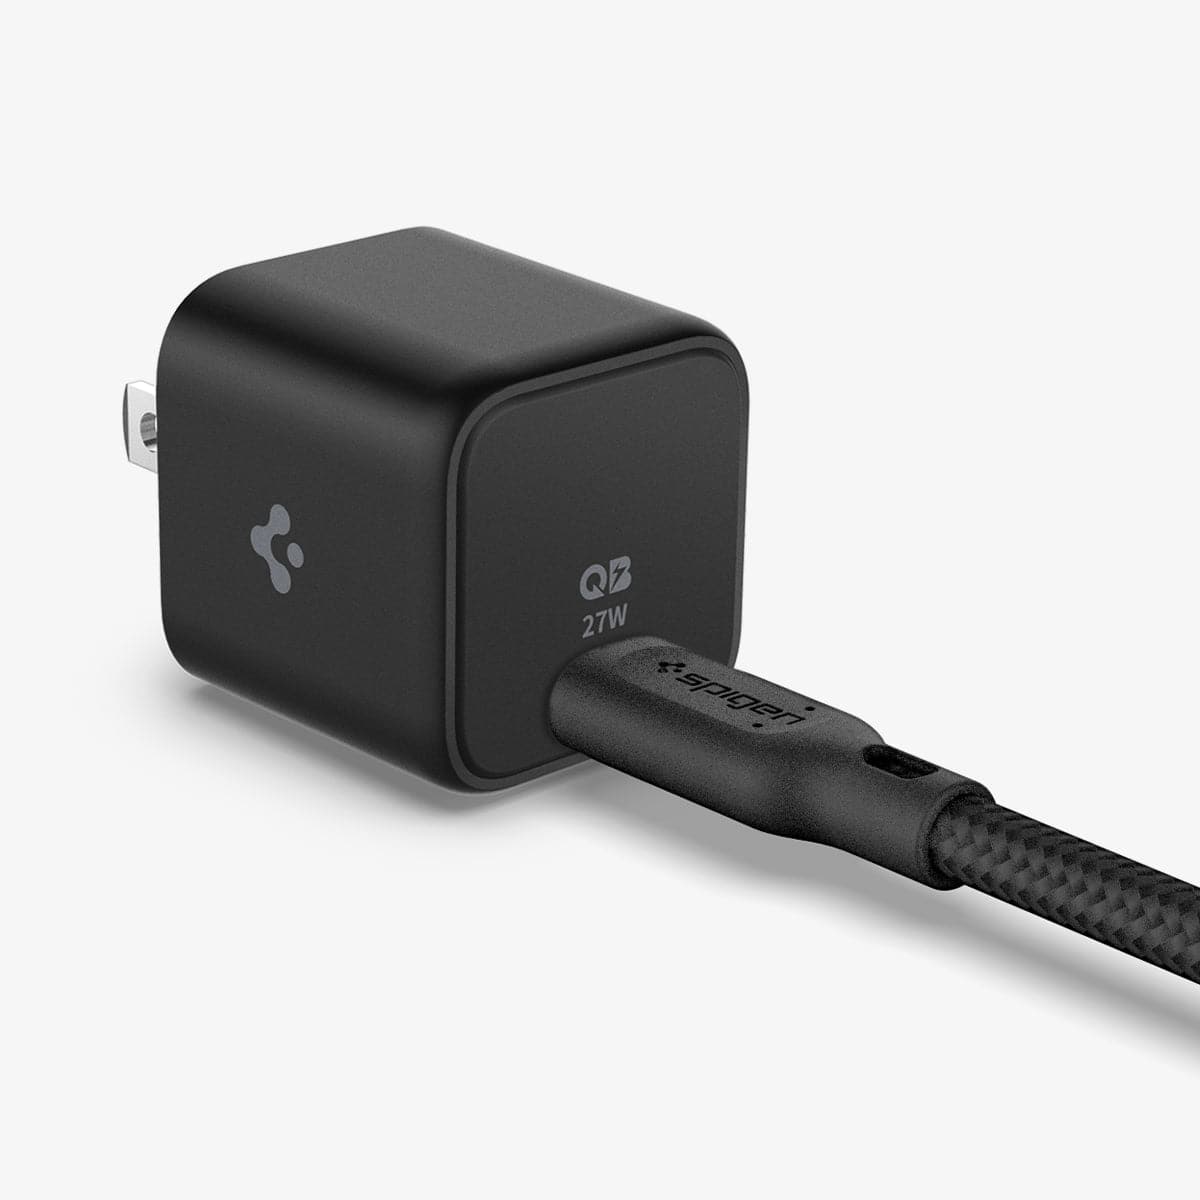 ACH05606 - ArcStation™ Pro 27W Wall Charger PE2103 in black showing the front, side and top with charging cable plugged in